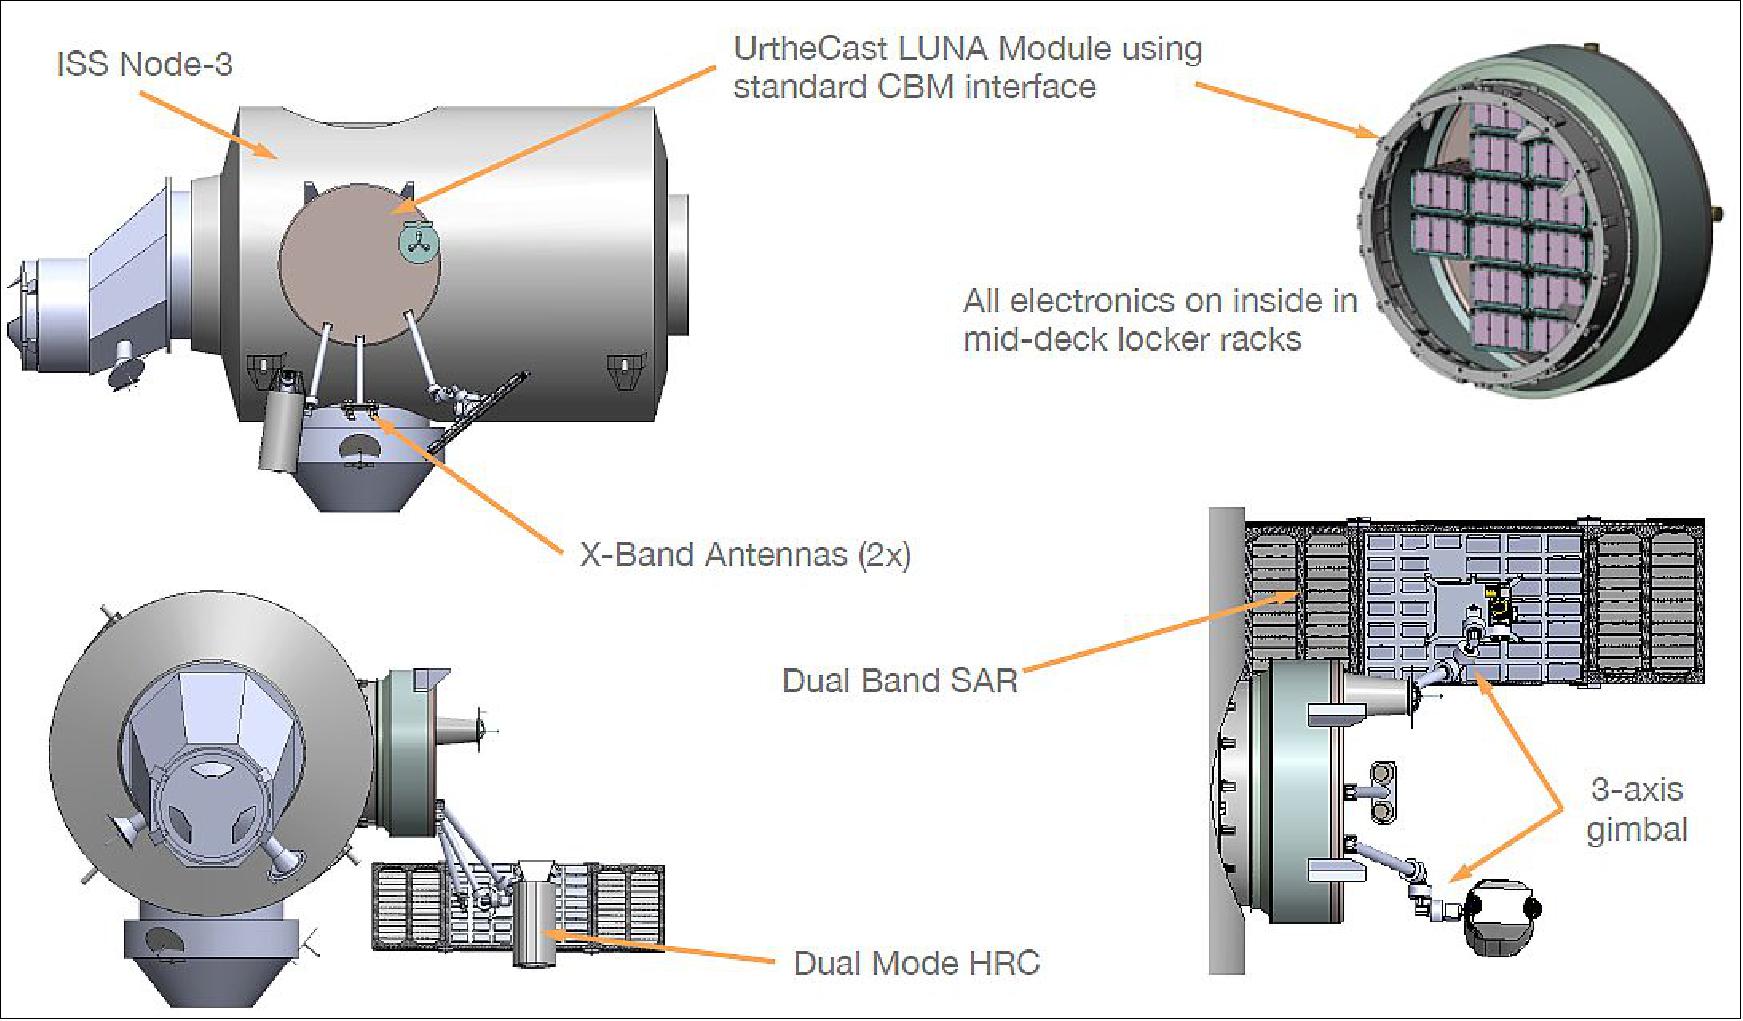 Figure 17: Alternate view of the UrtheCast second-generation payload on node 3 of the ISS (image credit: UrtheCast, Ref. 15)